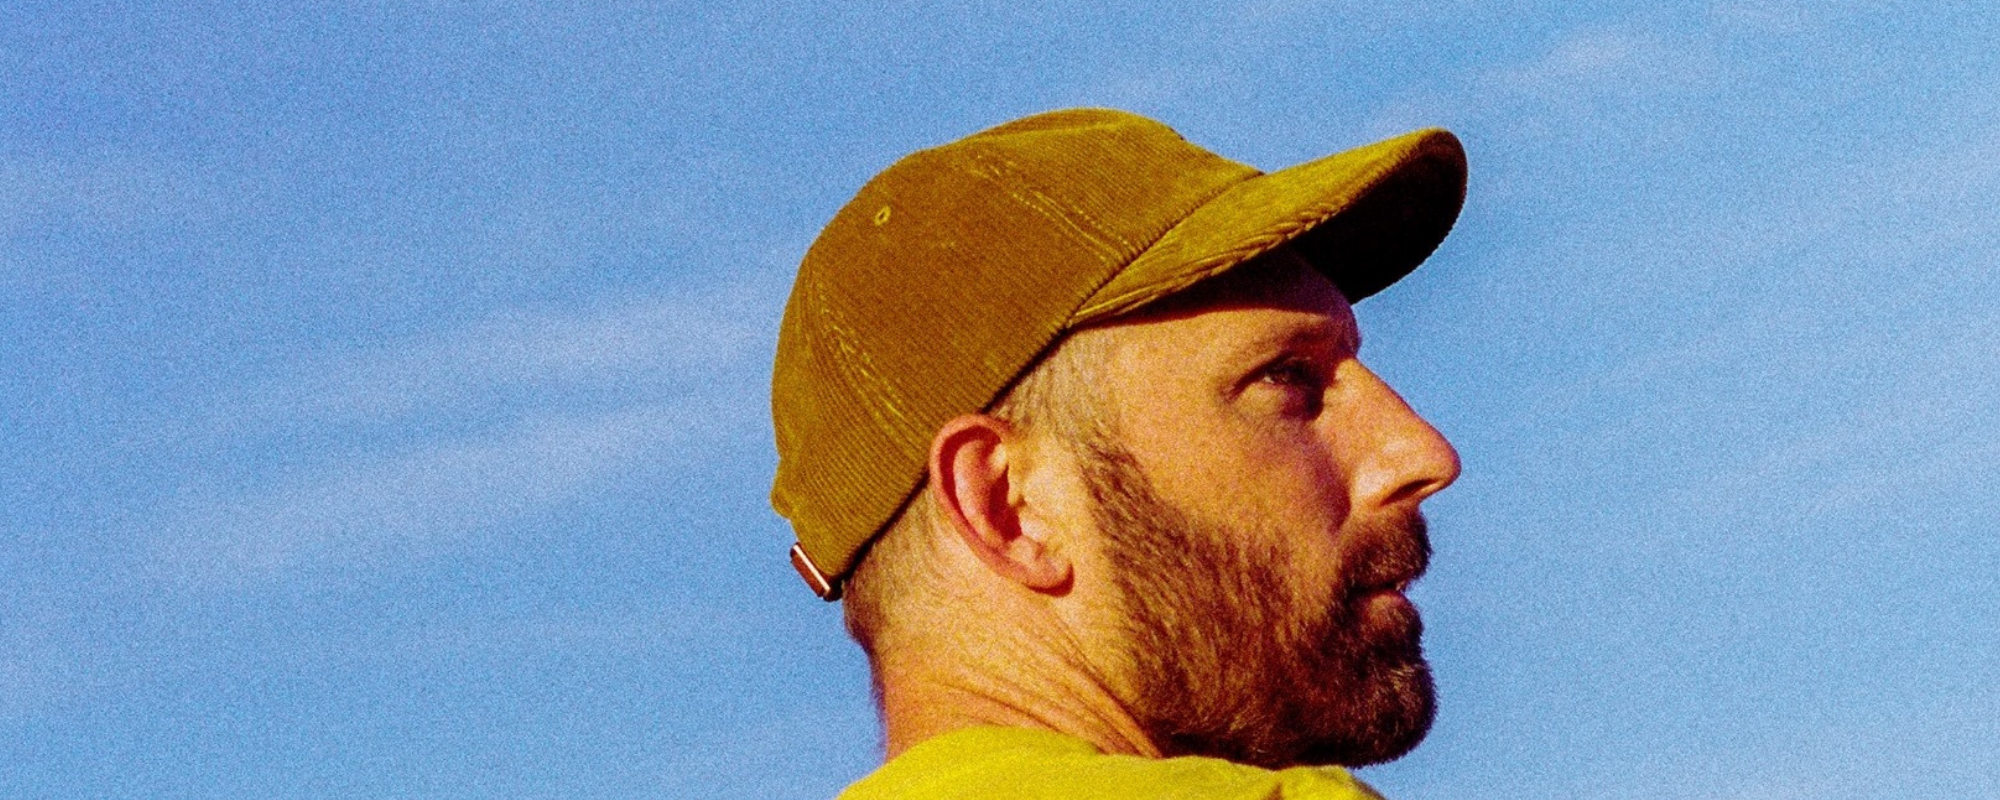 Mat Kearney Returns to His Songwriter Roots with New LP ‘January Flower’